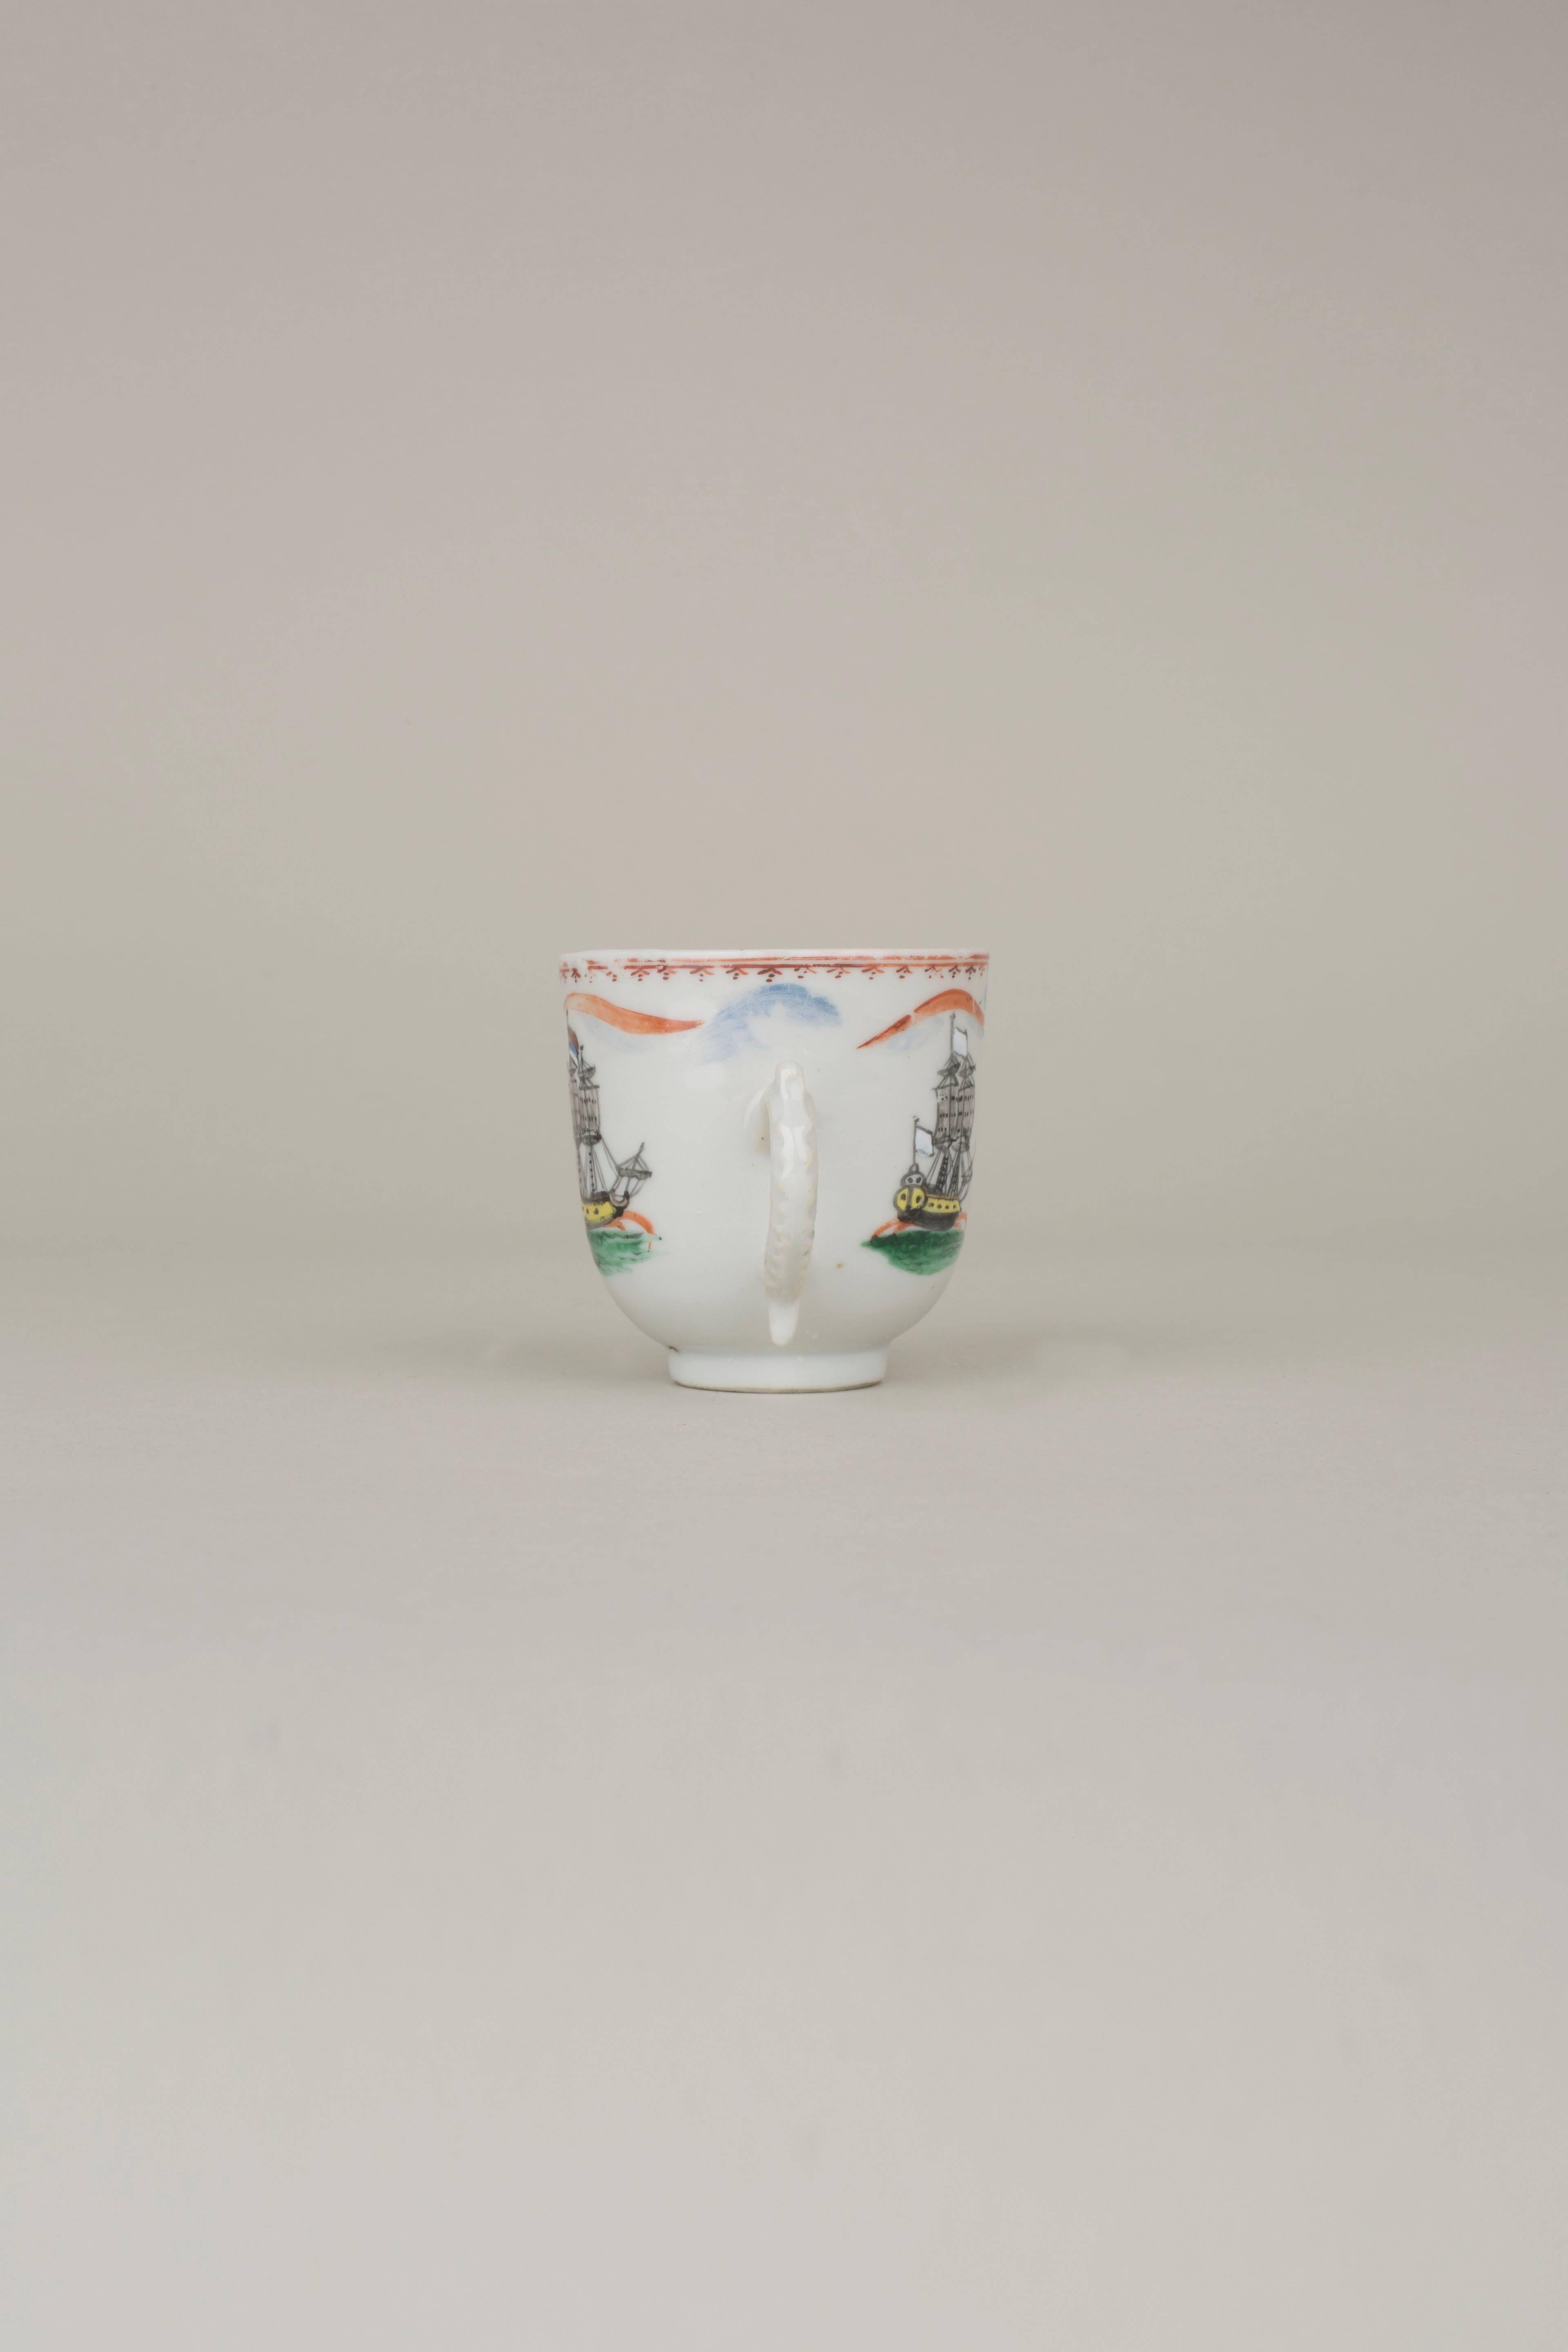 Enameled Chinese Export Porcelain Coffee Cup with Three Ships and Flags, 18th Century For Sale